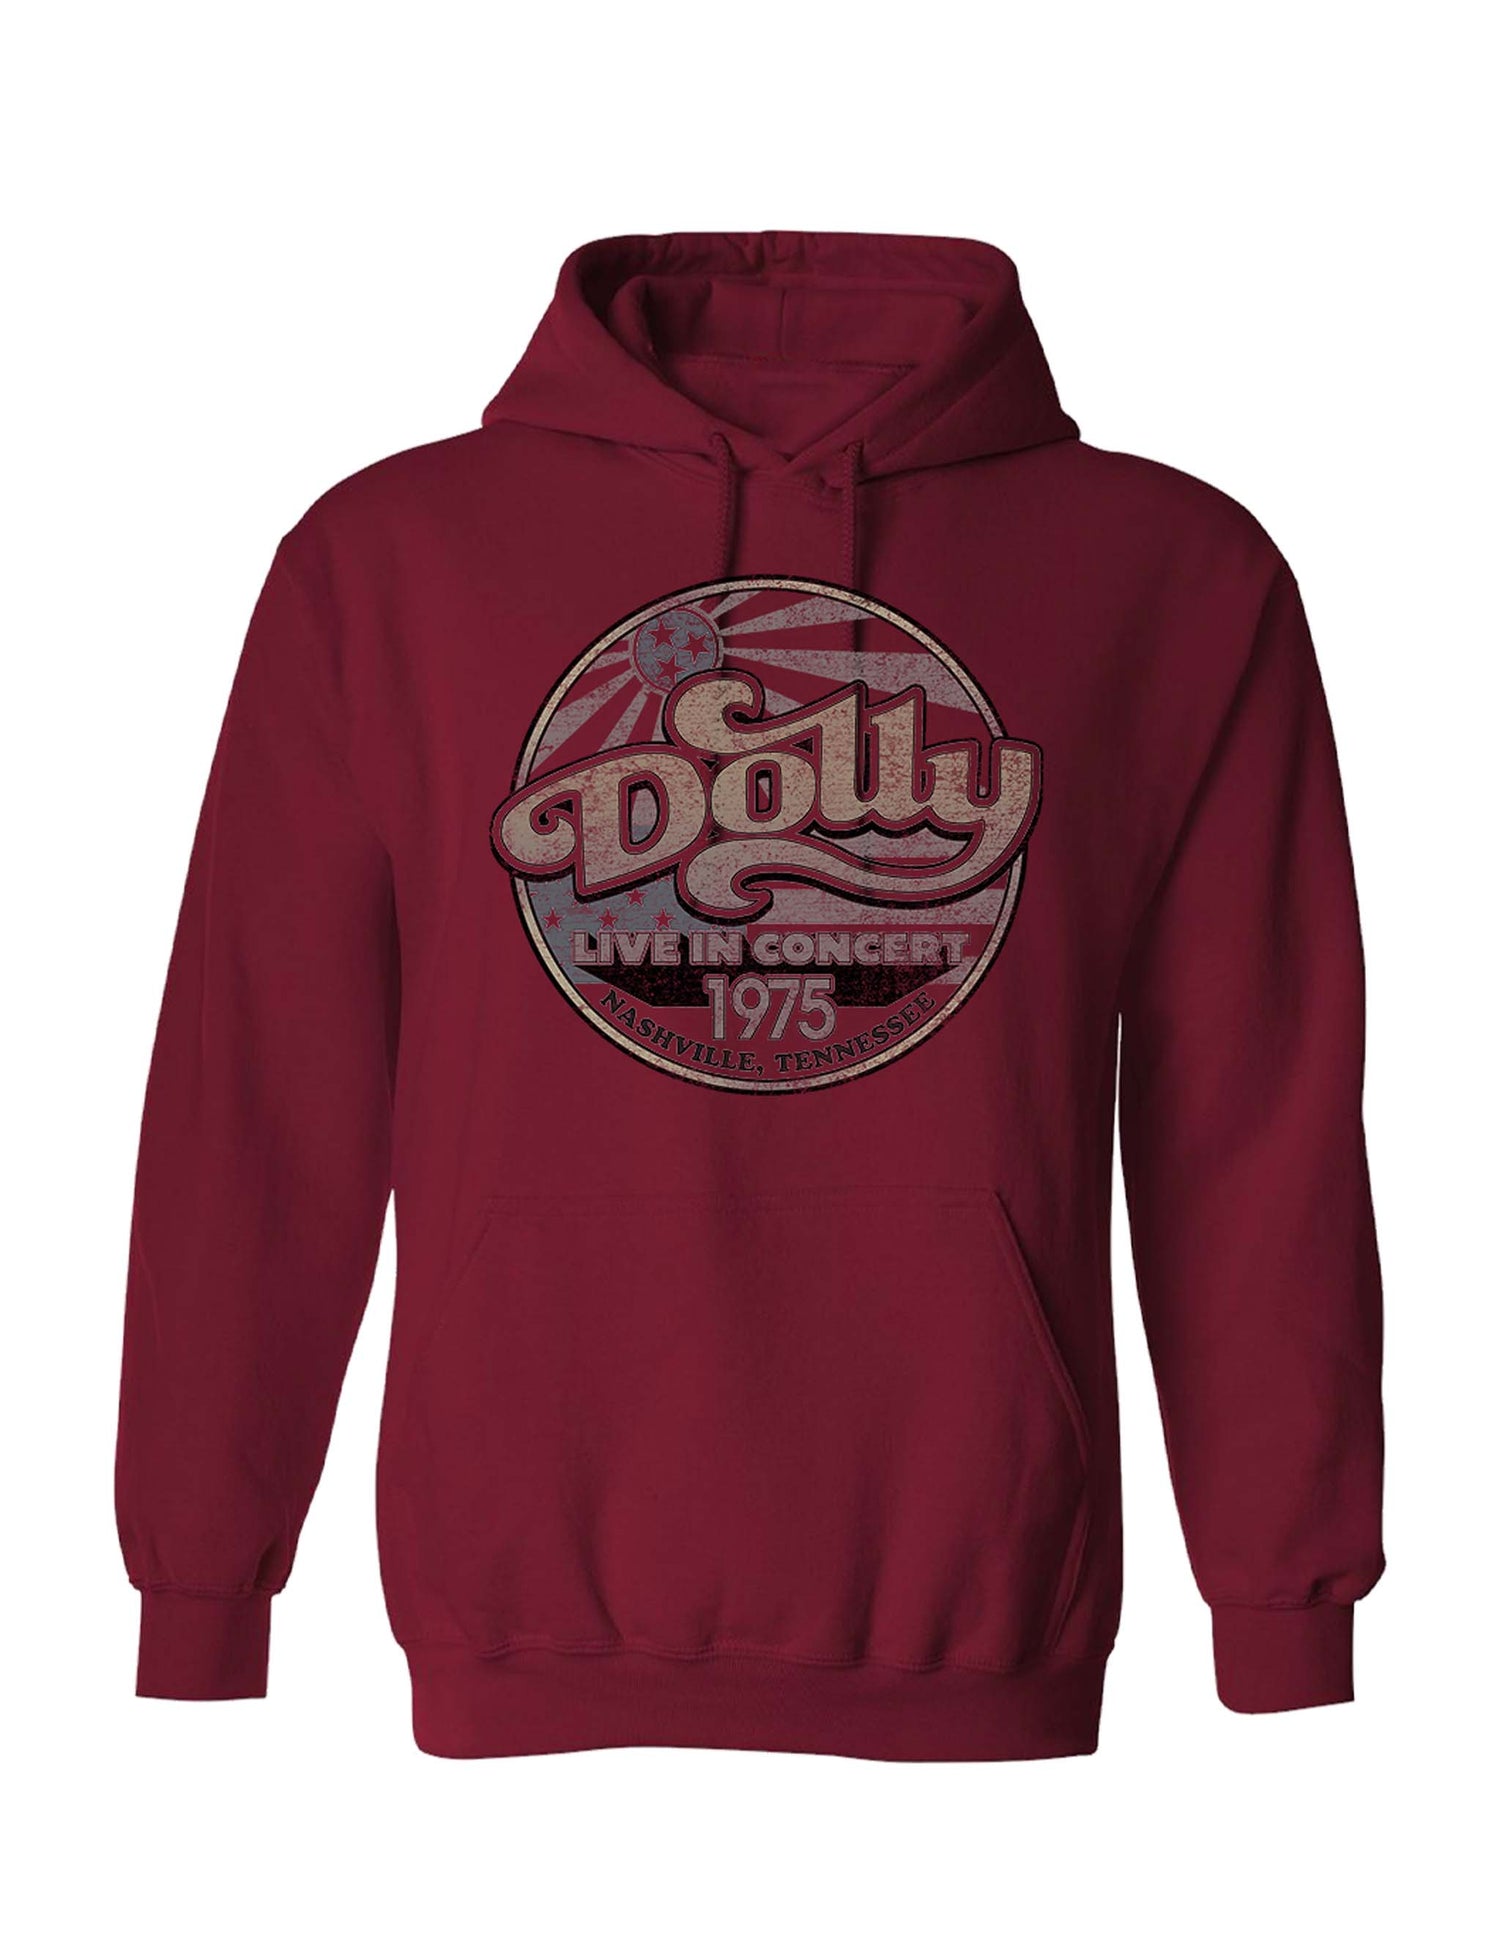 Dolly Parton Live In Concert 1975 Hoodie